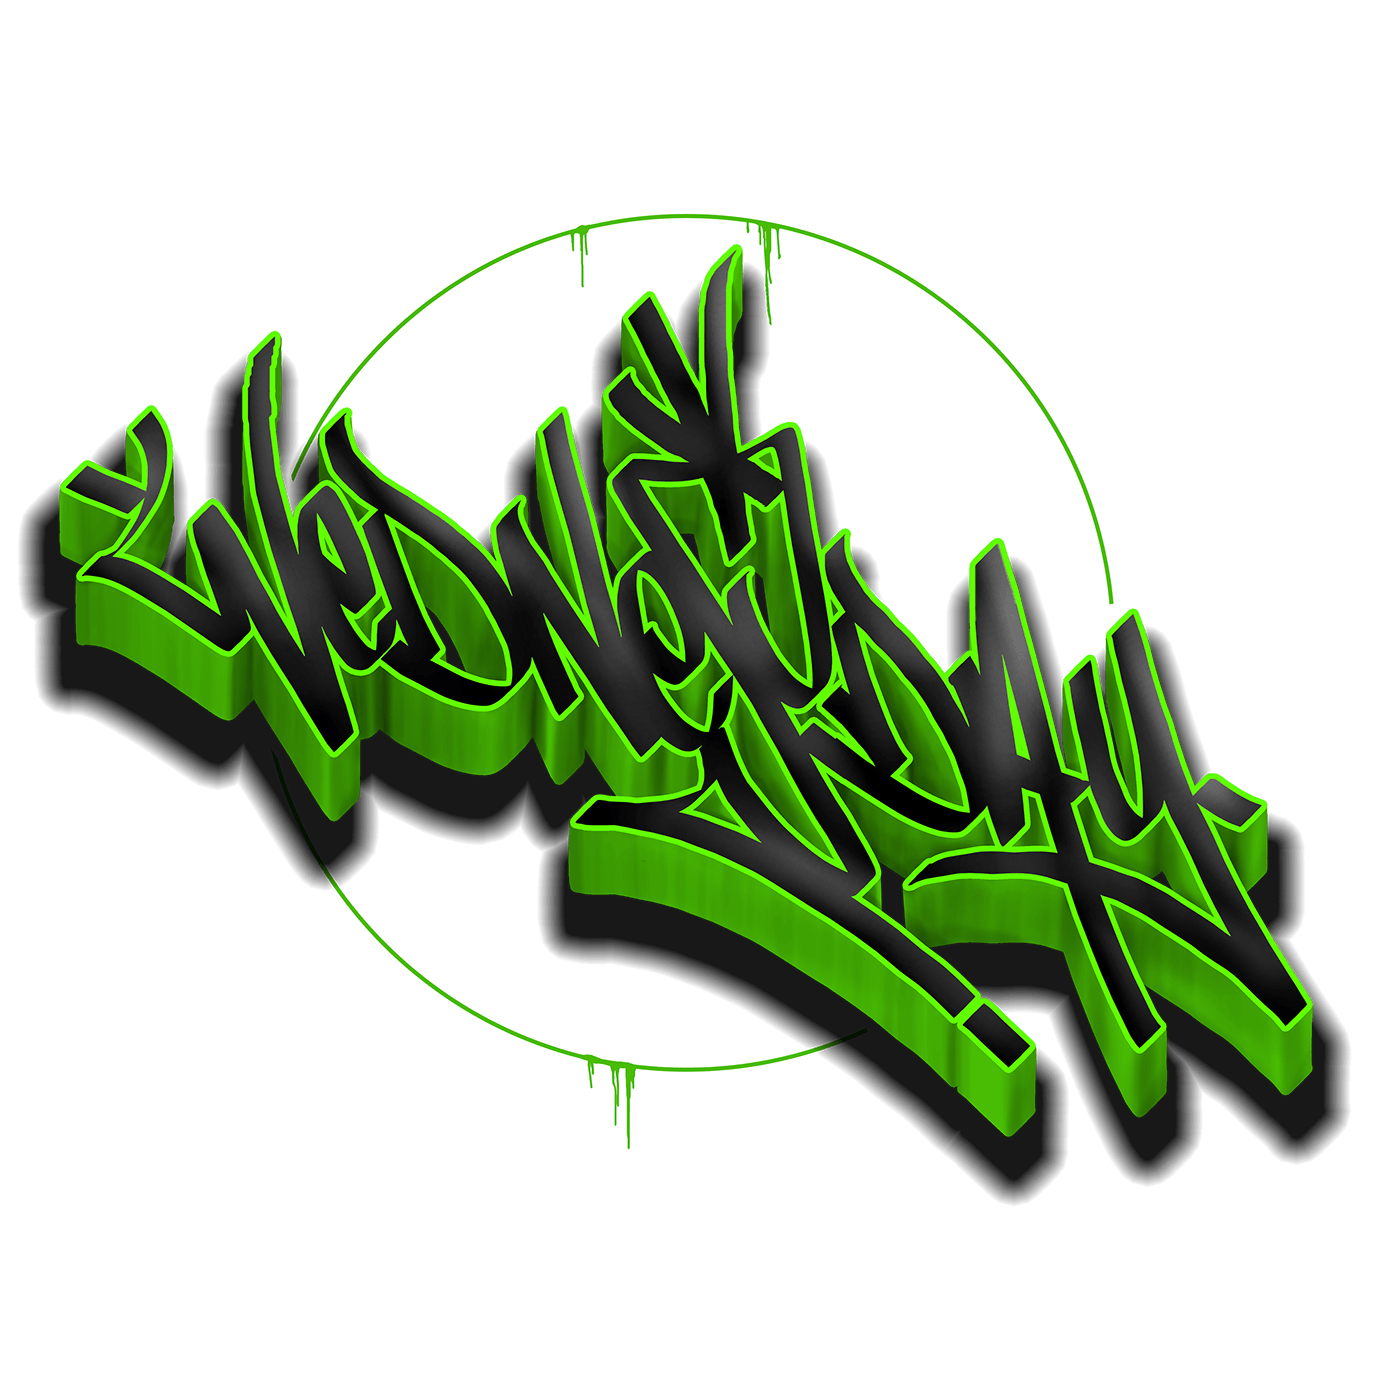 WEDNESDAY GRAFFITI 3D HANDSTYLE LETTERS
